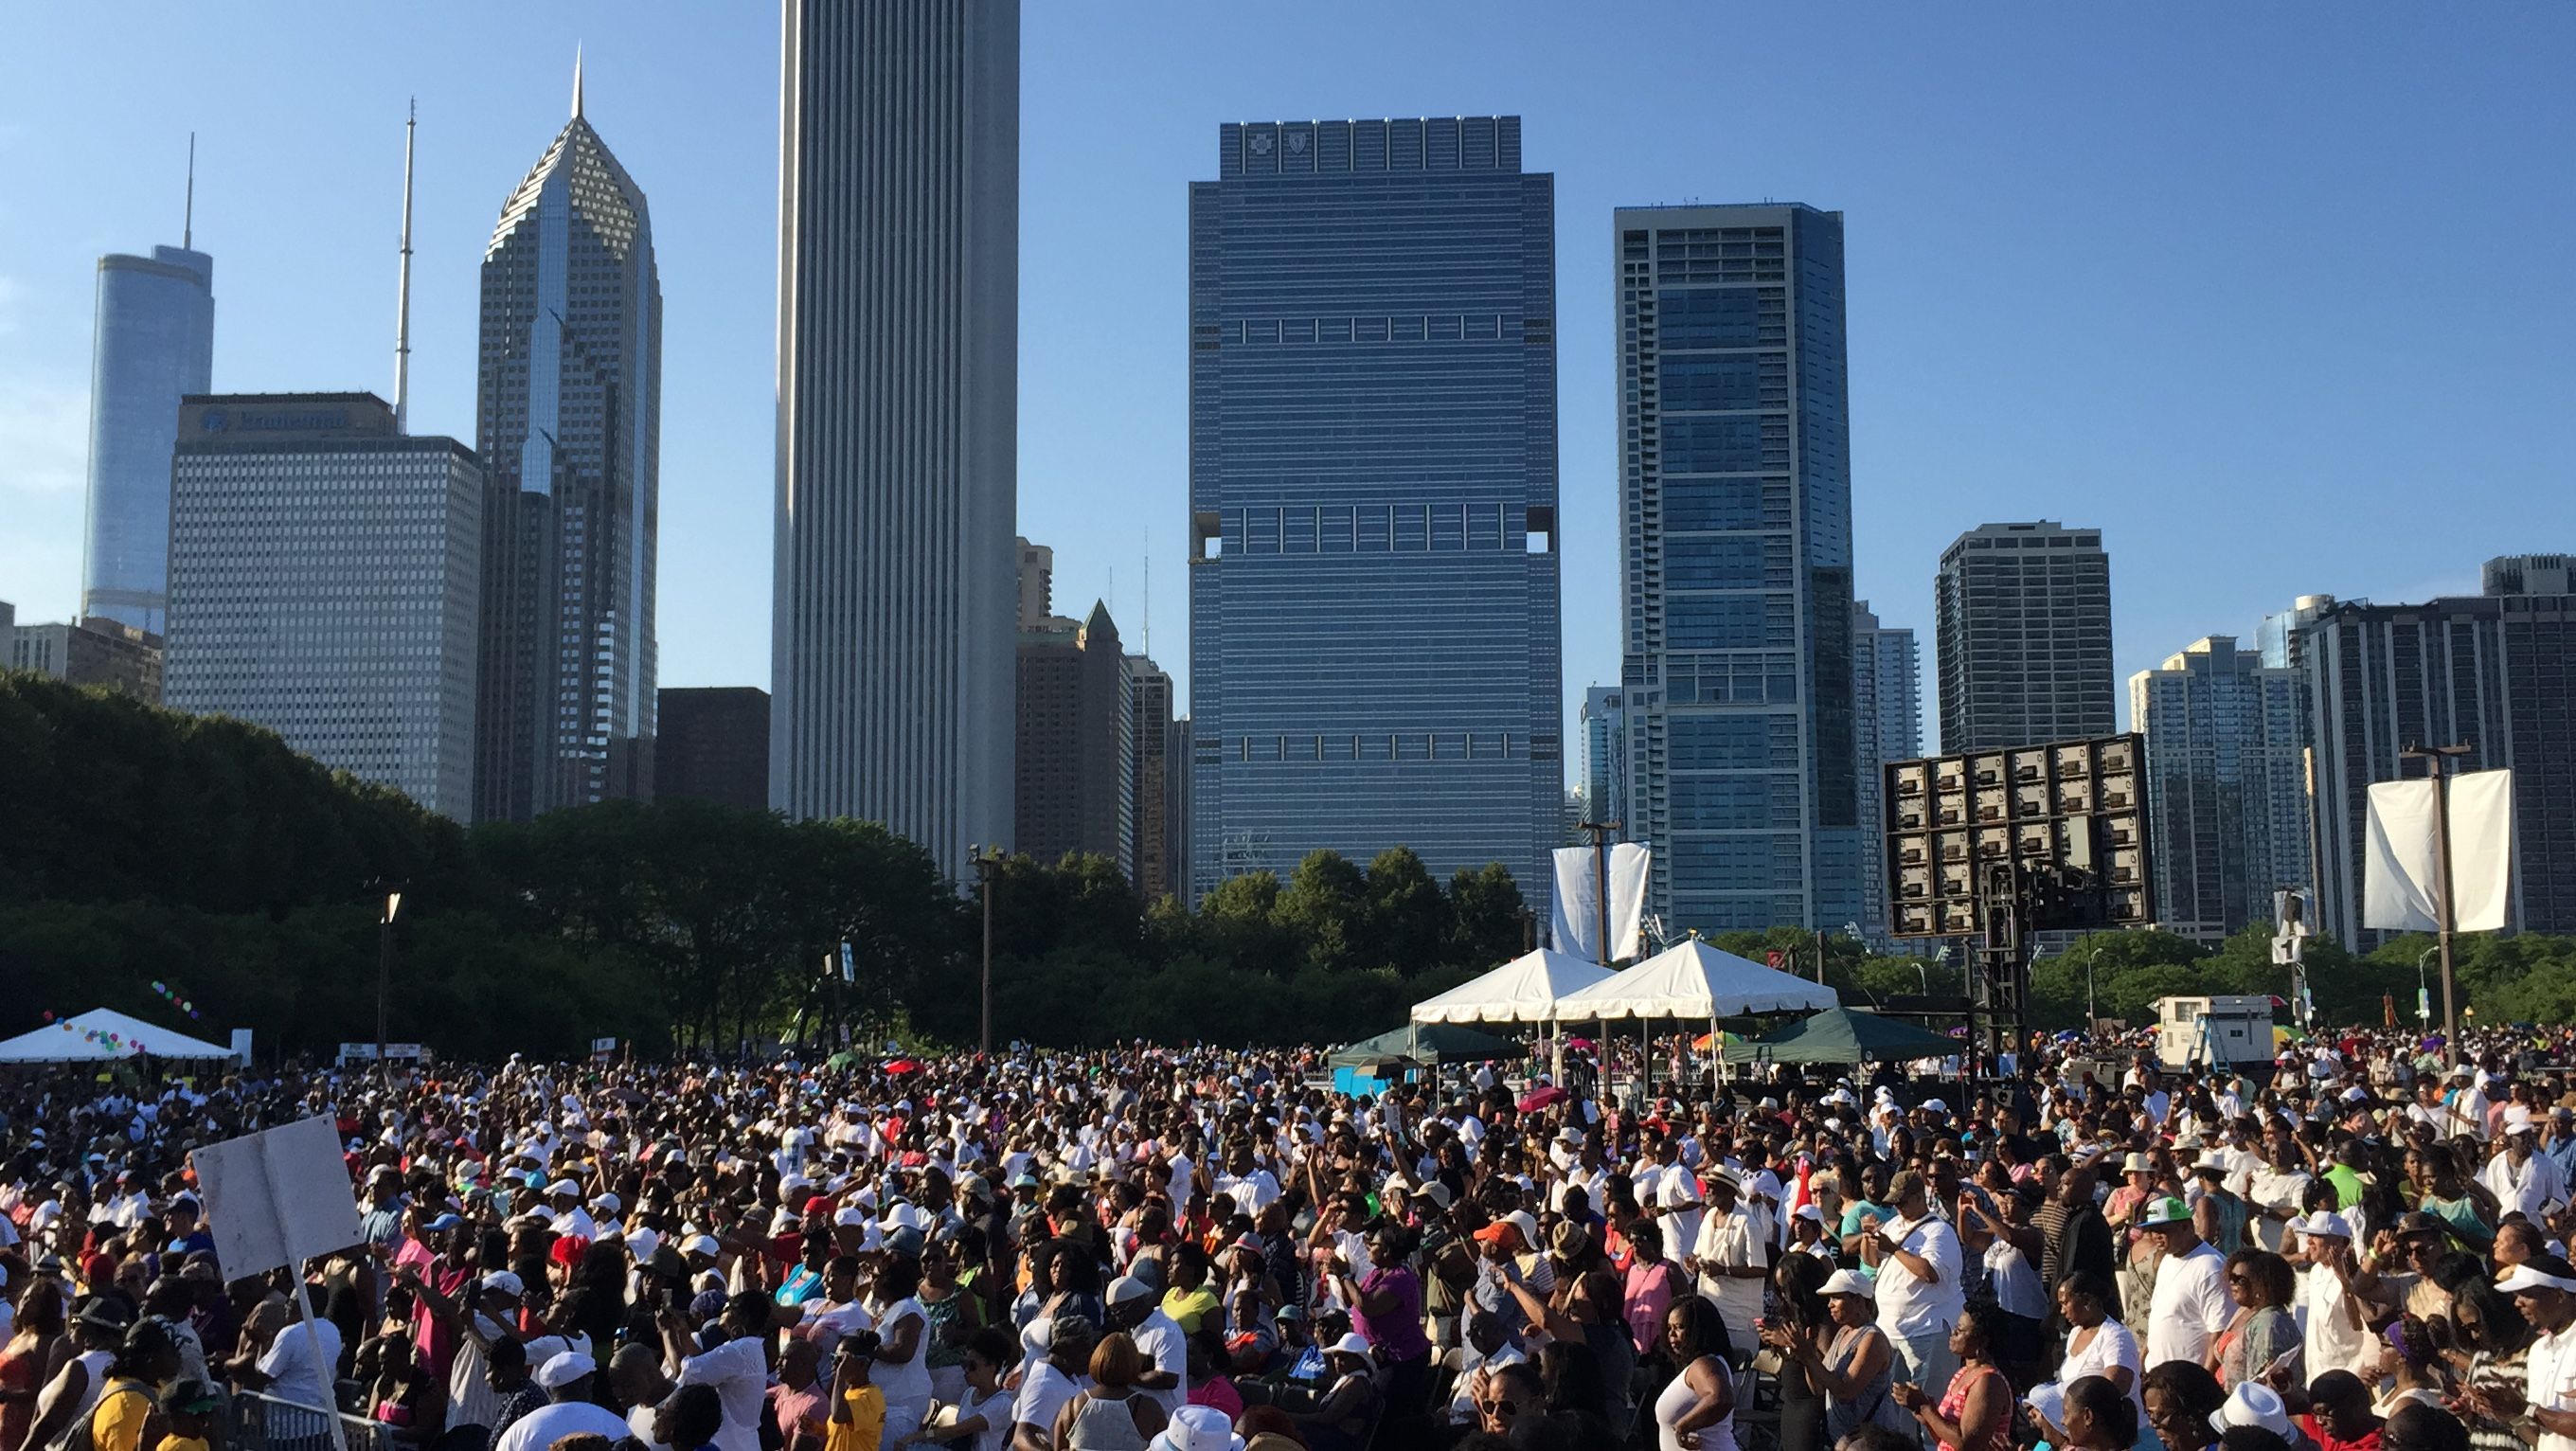 The Taste of Chicago Frankie Beverly & Maze crowd with the city in the background, 2015. Photo credit: KELZ 